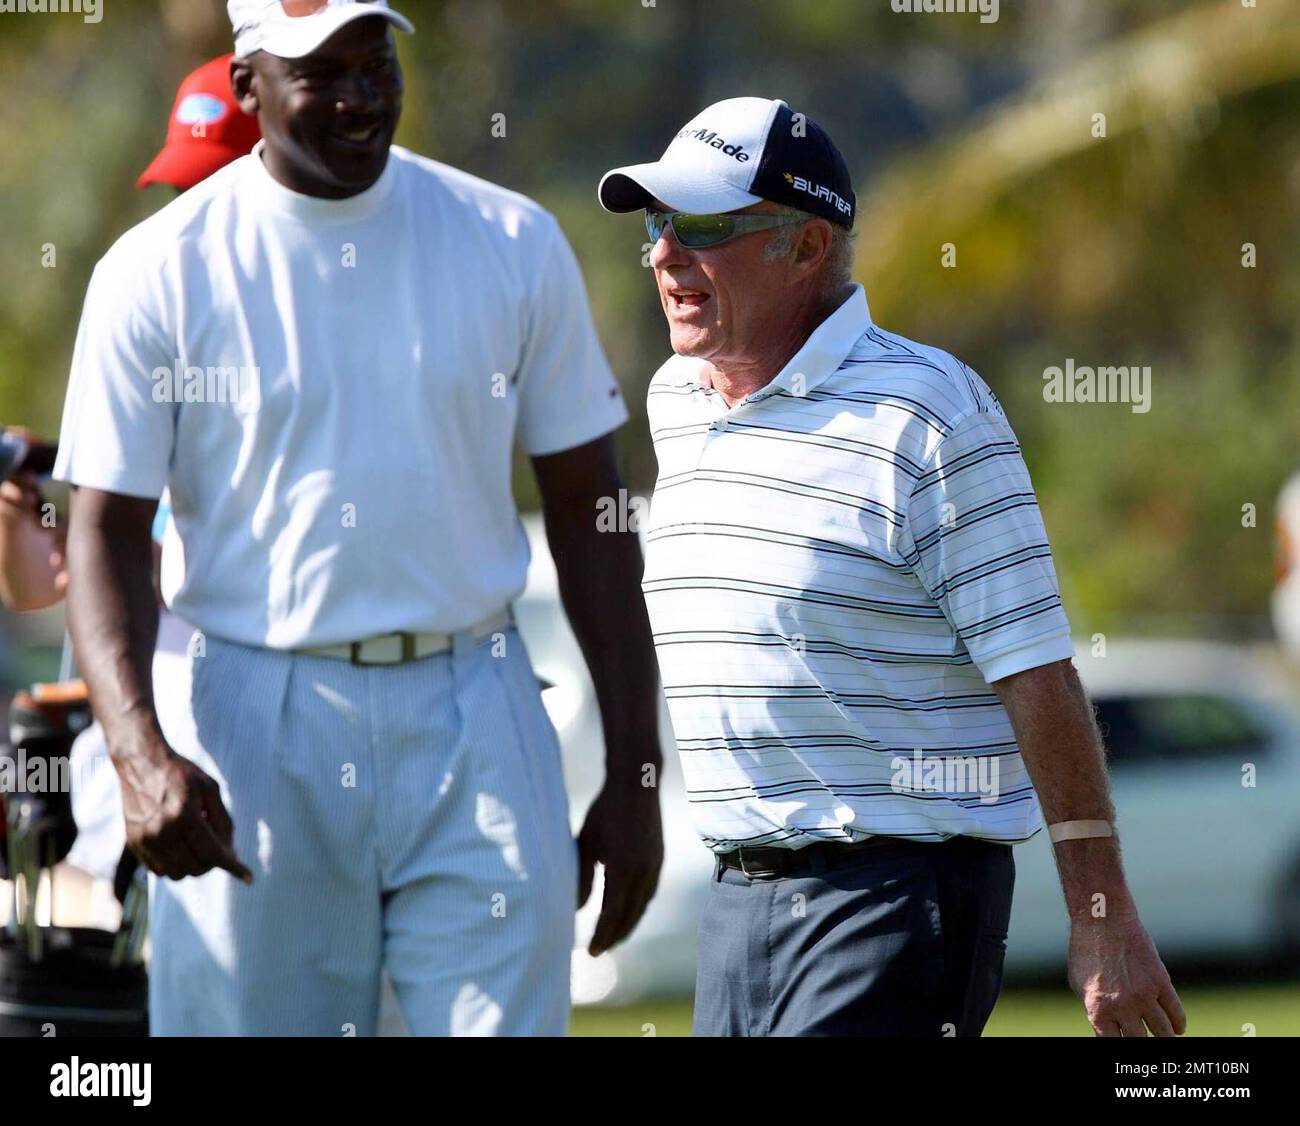 Exclusive!! James Caan and Michael Jordan play on day three of The Michael Jordan Celebrity Invitational golf tournament held at the luxurious One and Only Ocean Club Golf Course on Paradise Island. At one point, Young hit one into the rough which, in this case, was the beach on the other side of a wall! He worked very hard to get it back onto the course. At least it didn't end up in the ocean. The MJCI organization brings in an incredible array of talent from the worlds of sport and entertainment to compete on the course and participate in various events for charity in this annual event.  In Stock Photo